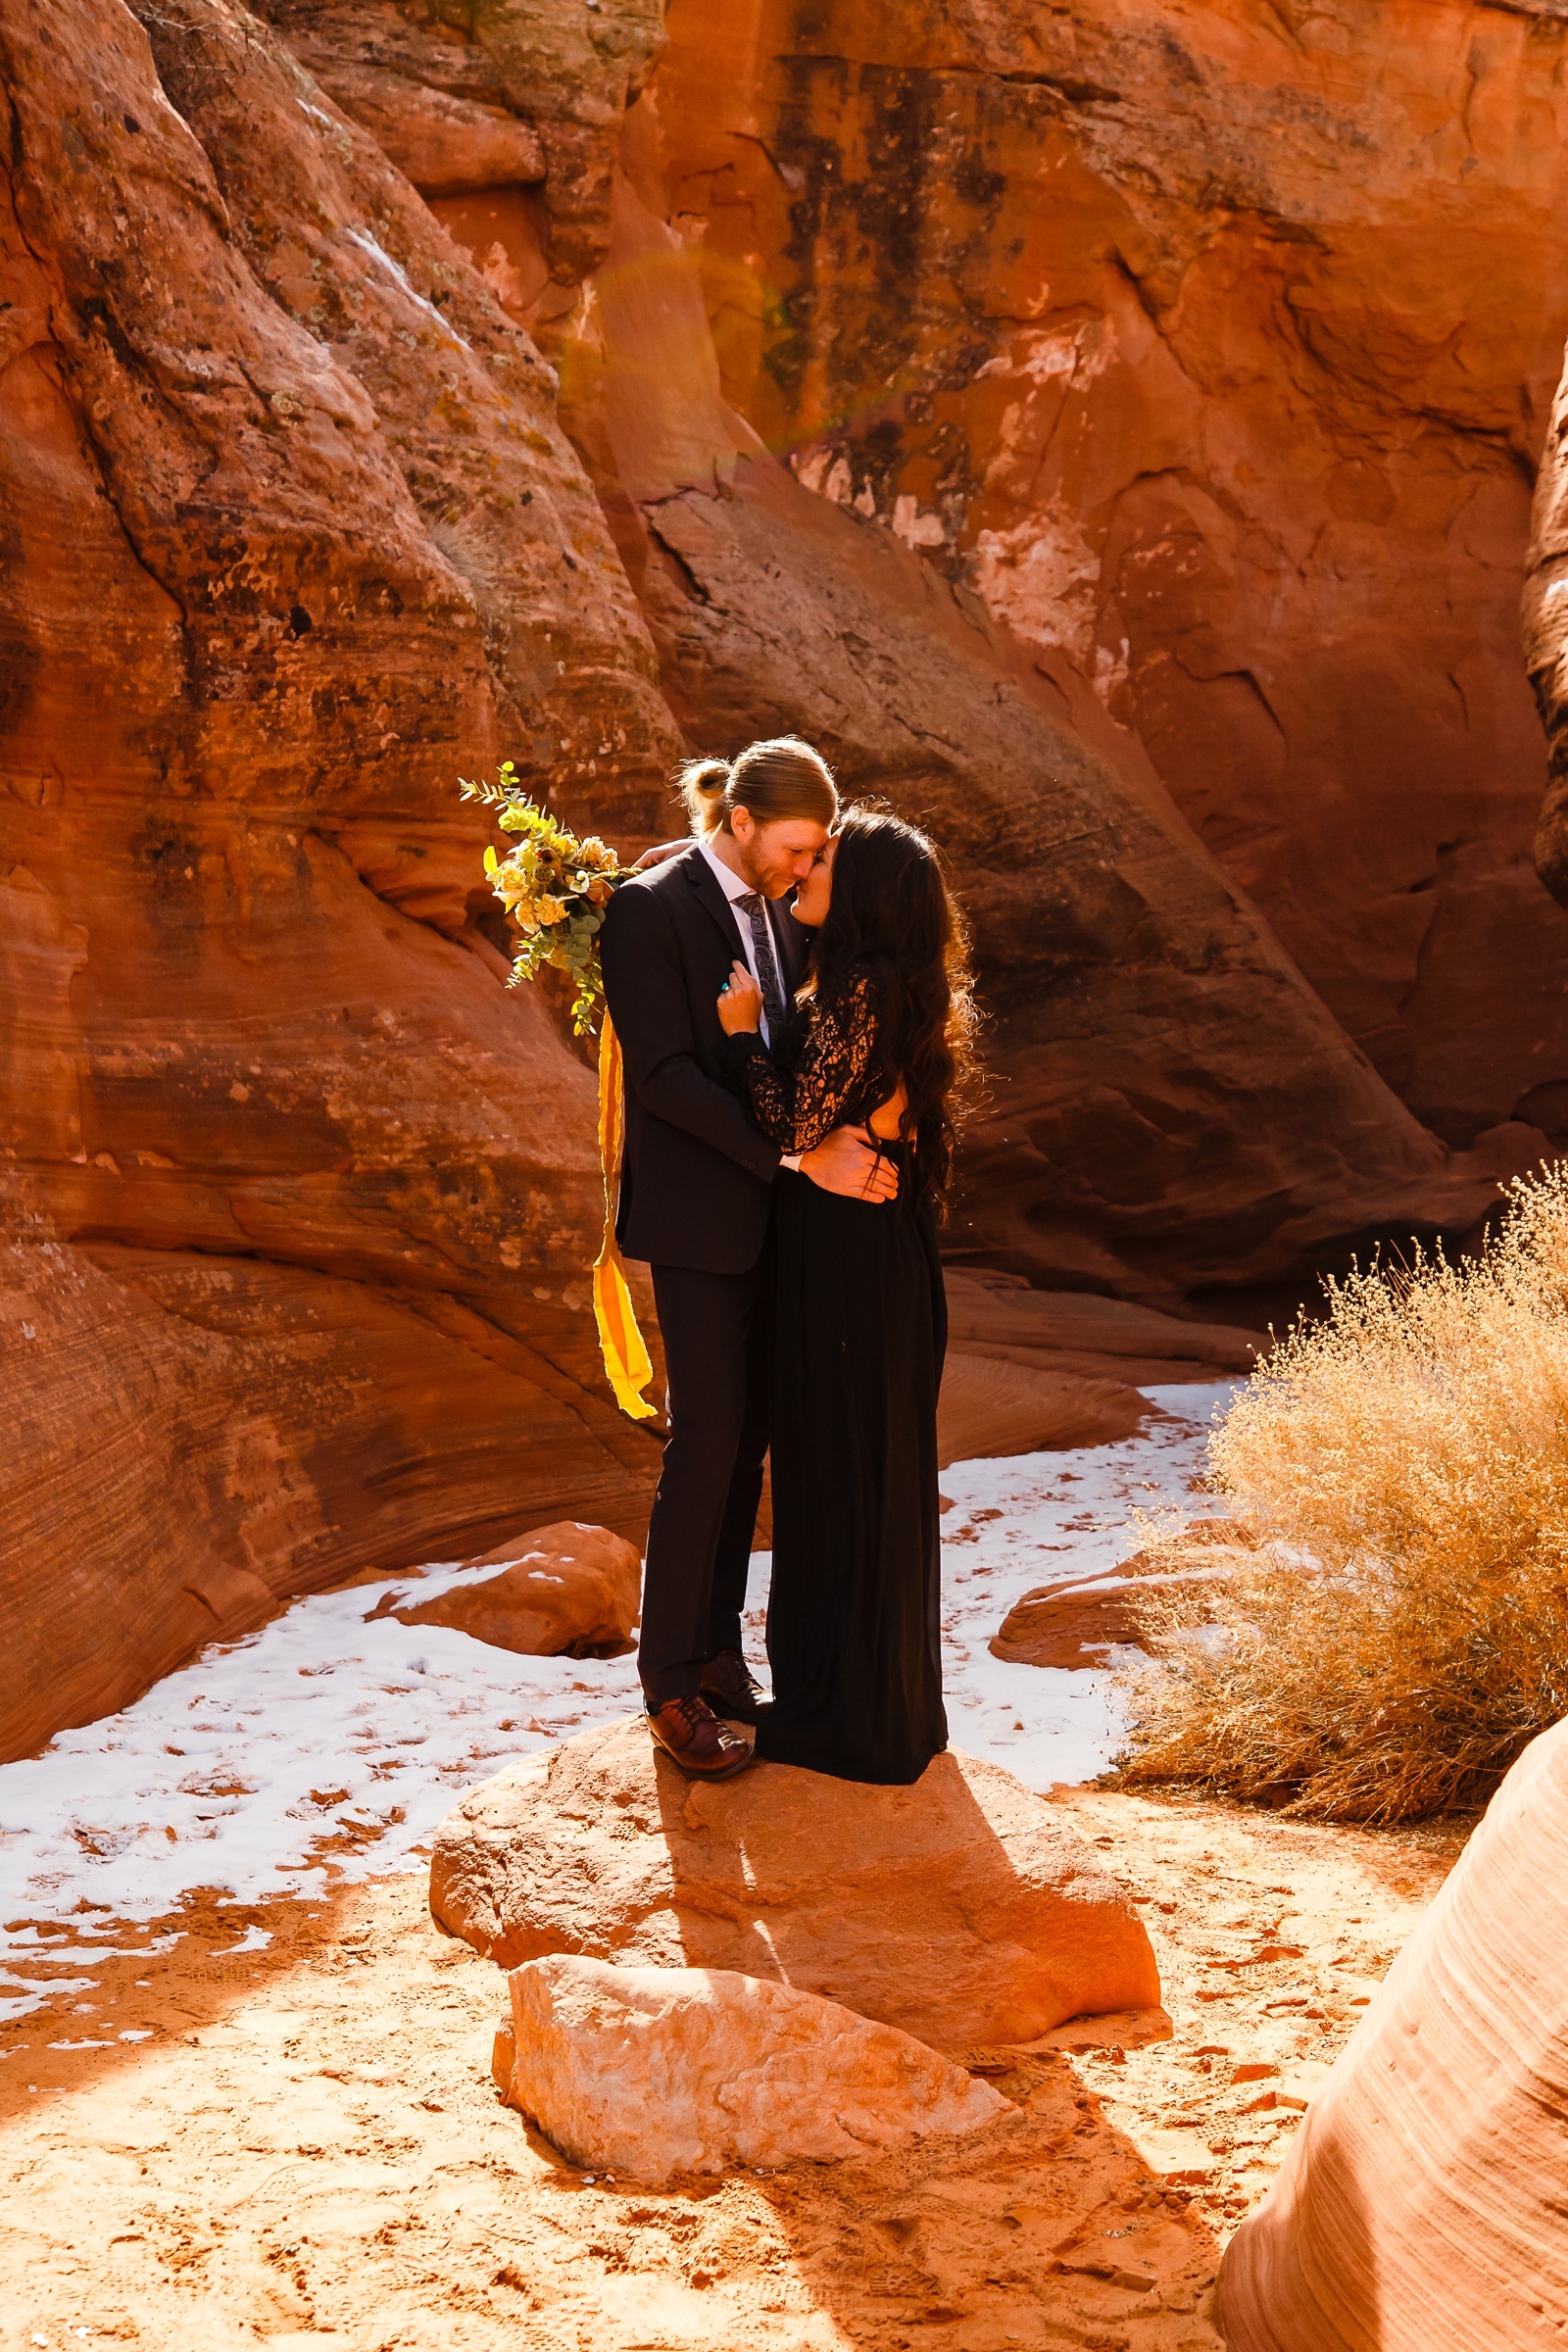 Couple kissing in a snowy slot canyon.